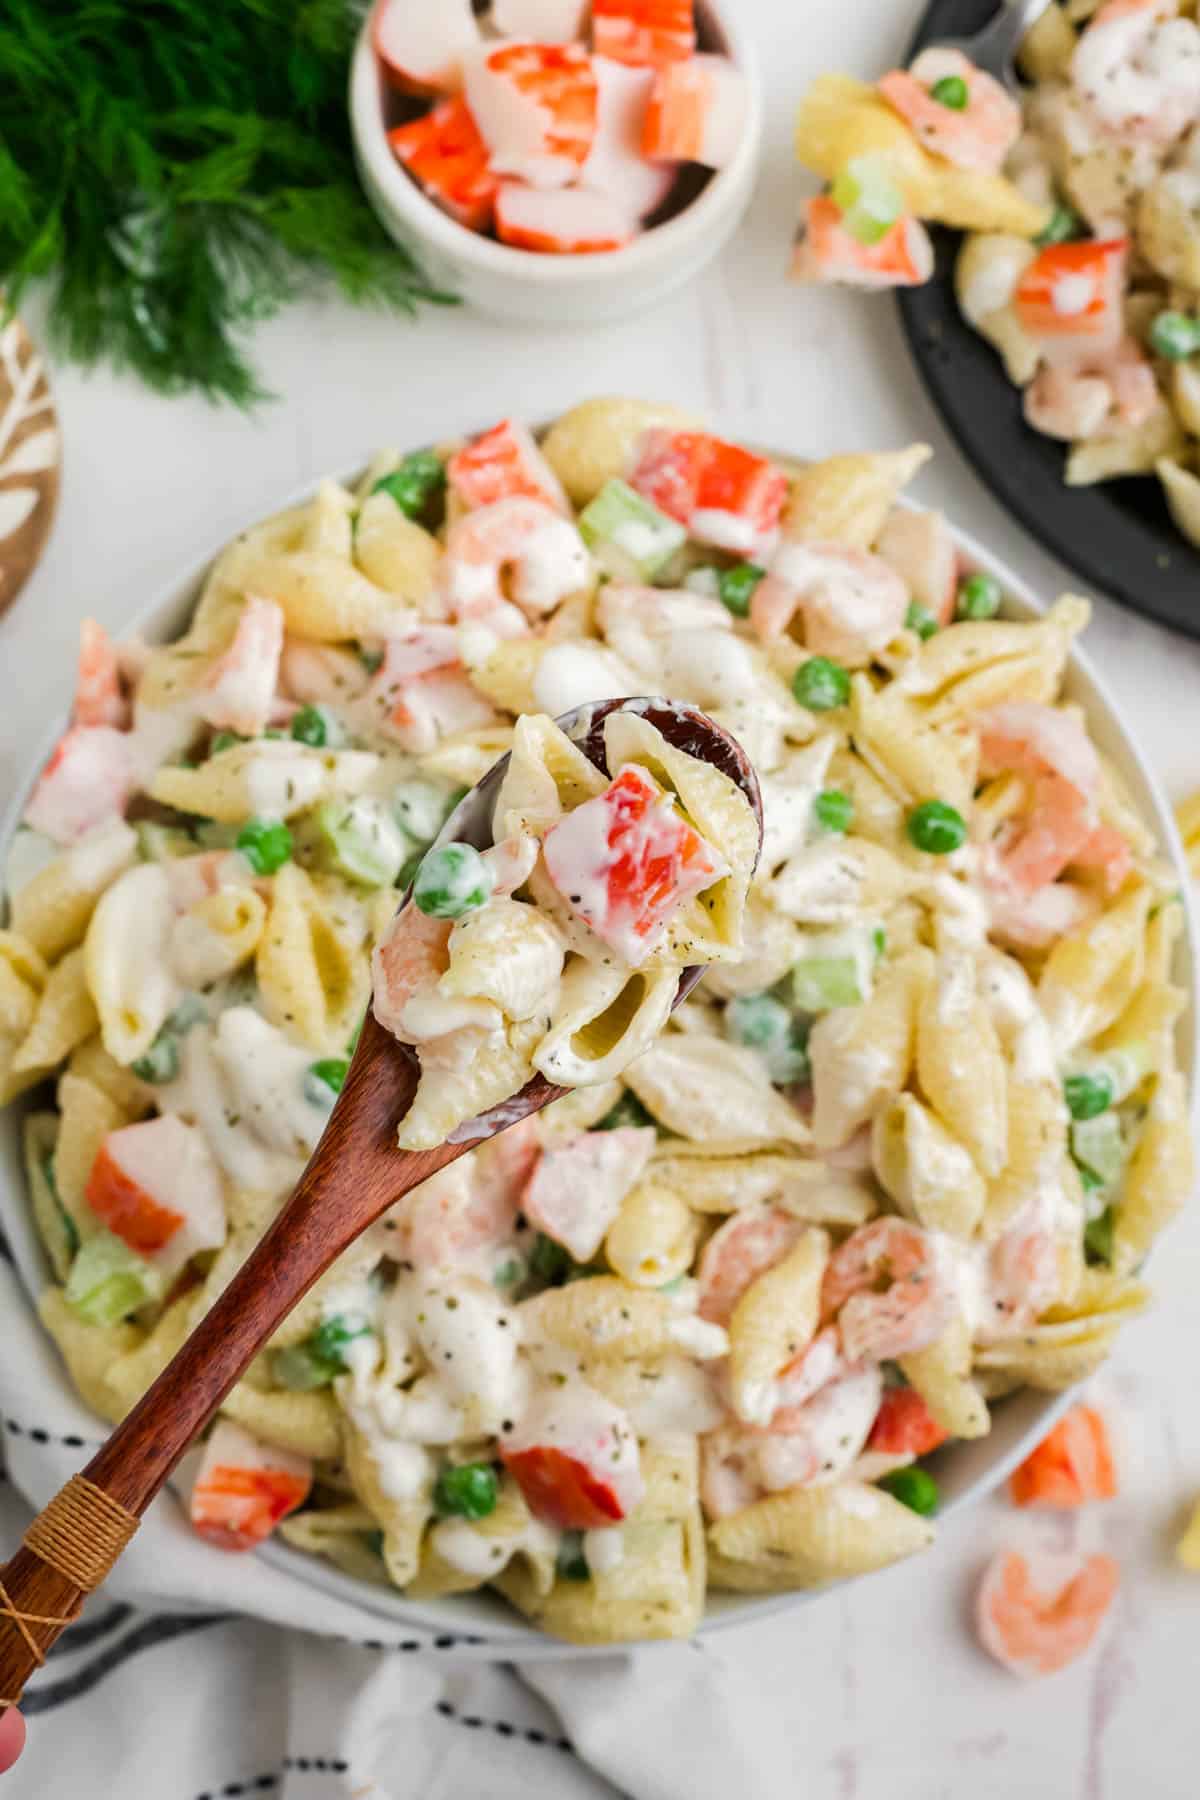 A spoon lifting up a large bite of seafood pasta salad with crab and shrimp.